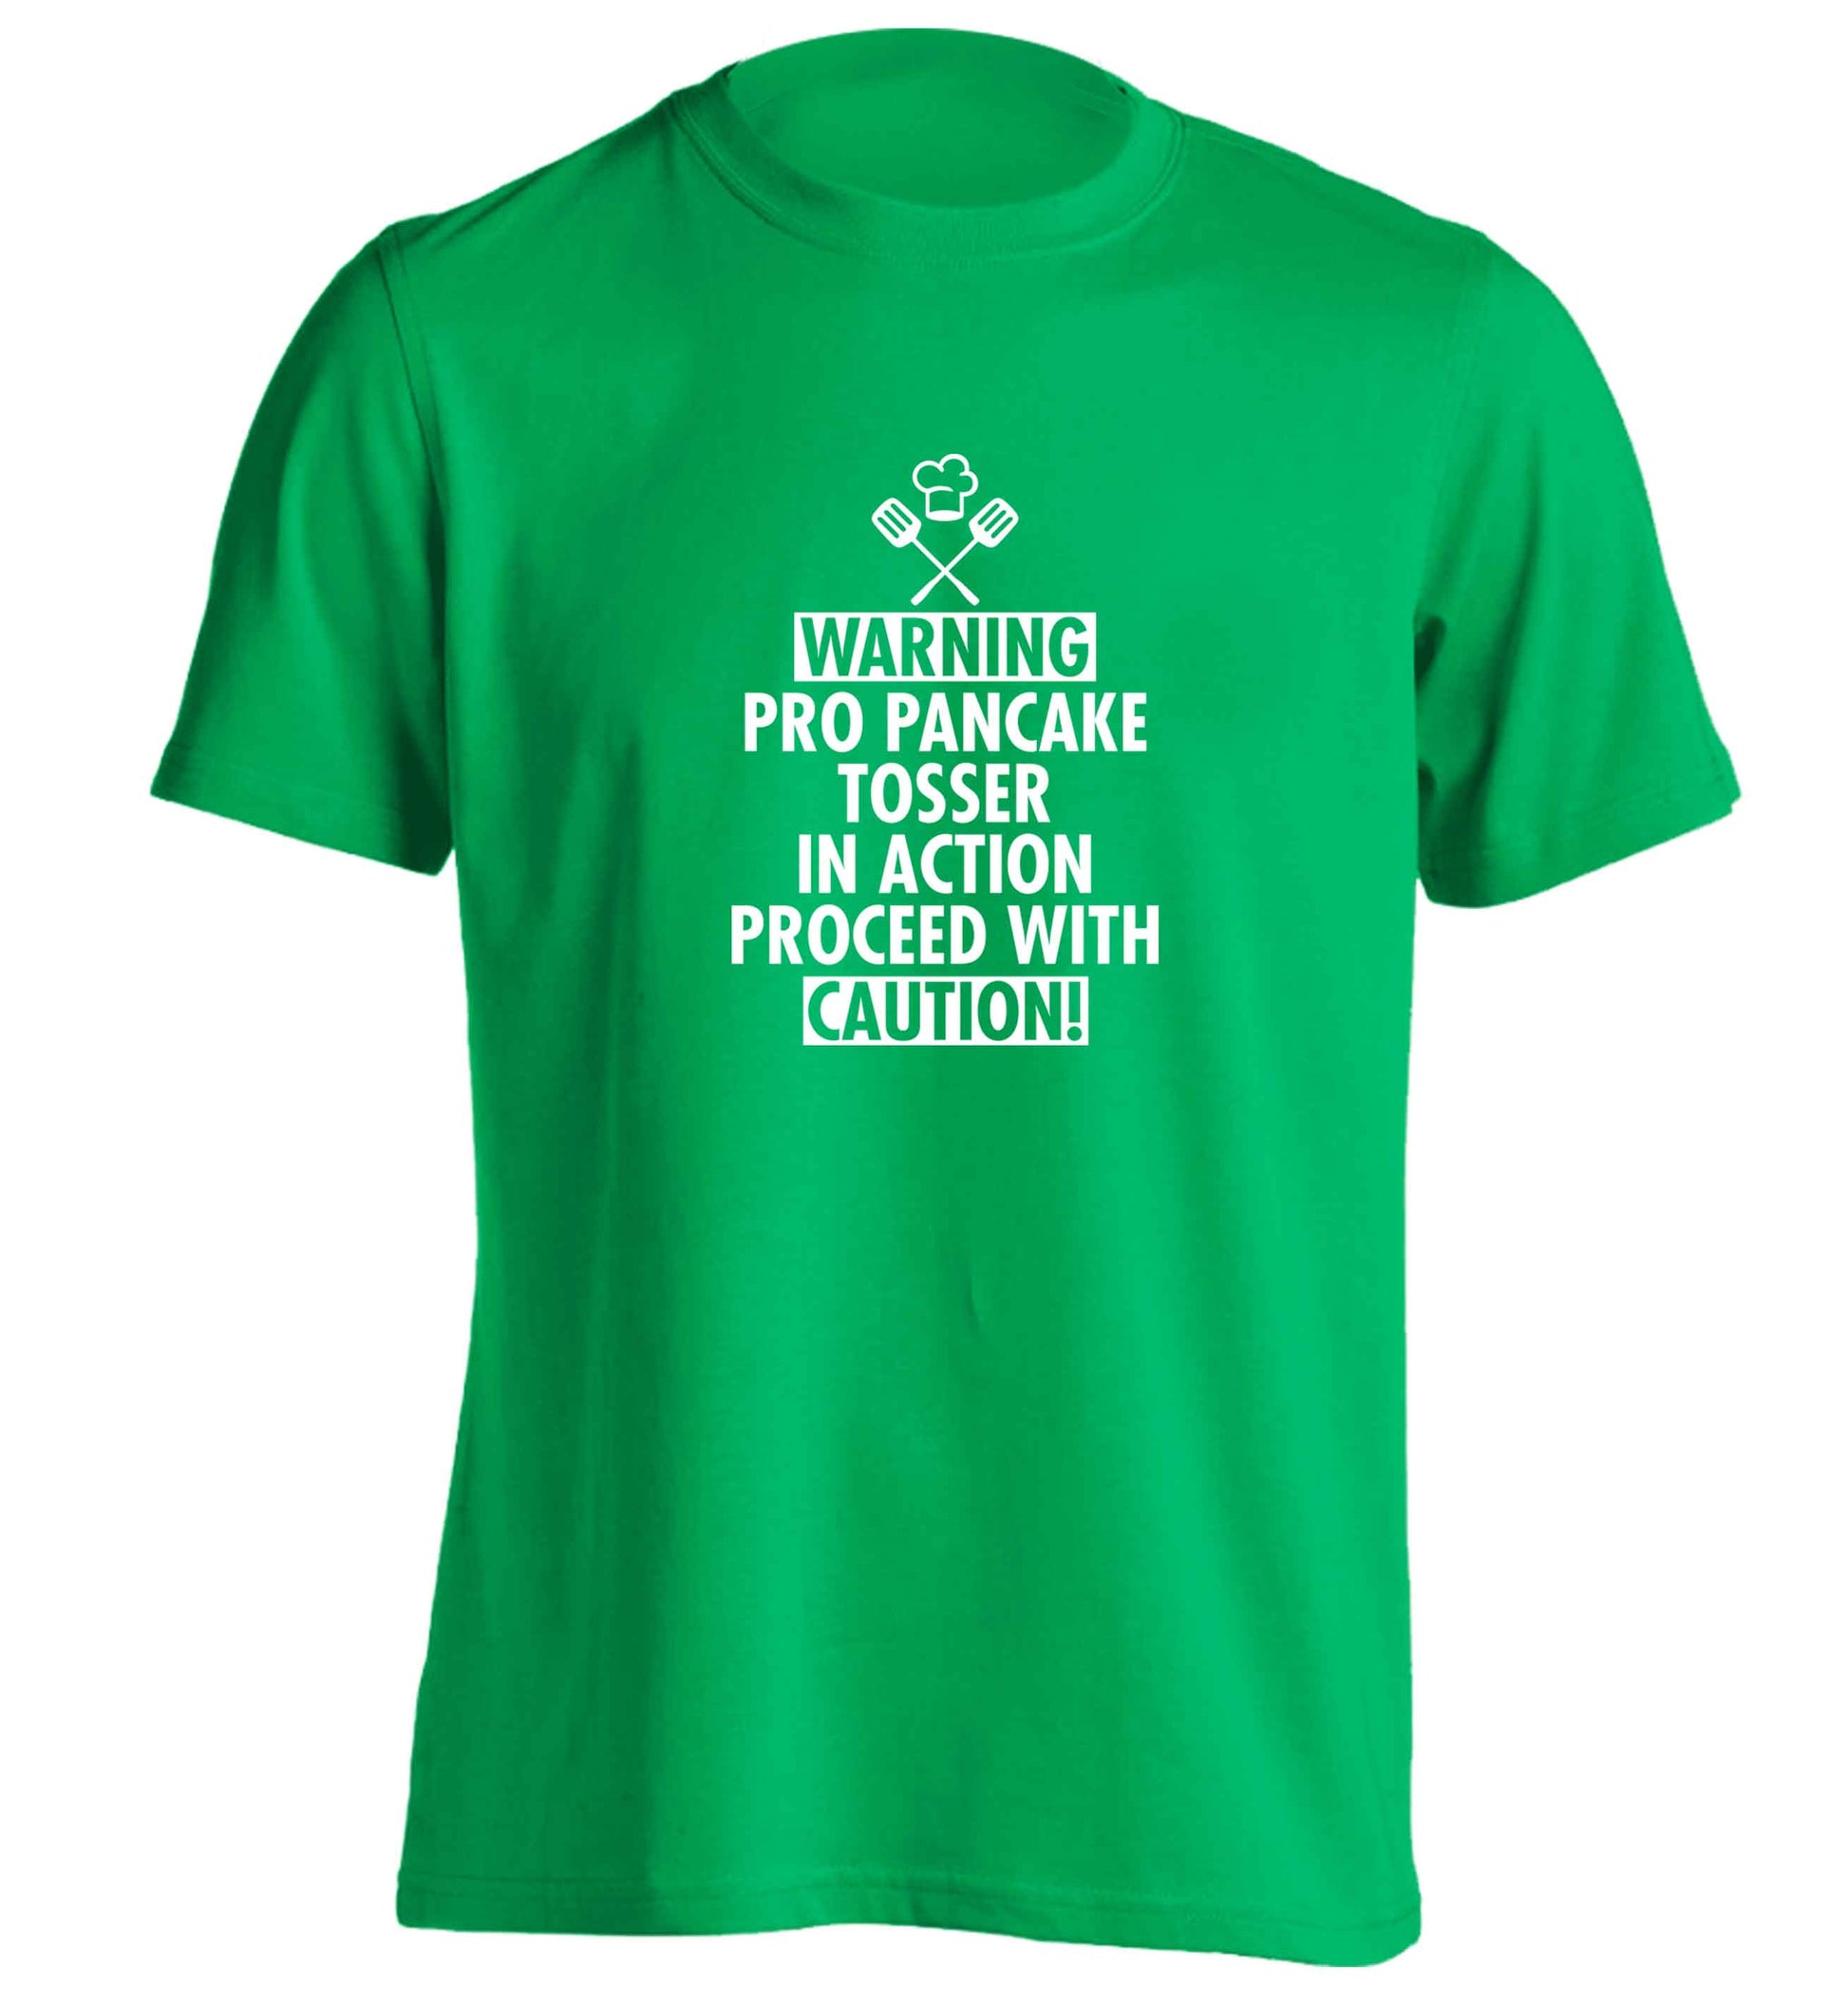 Warning pro pancake tosser in action proceed with caution adults unisex green Tshirt 2XL